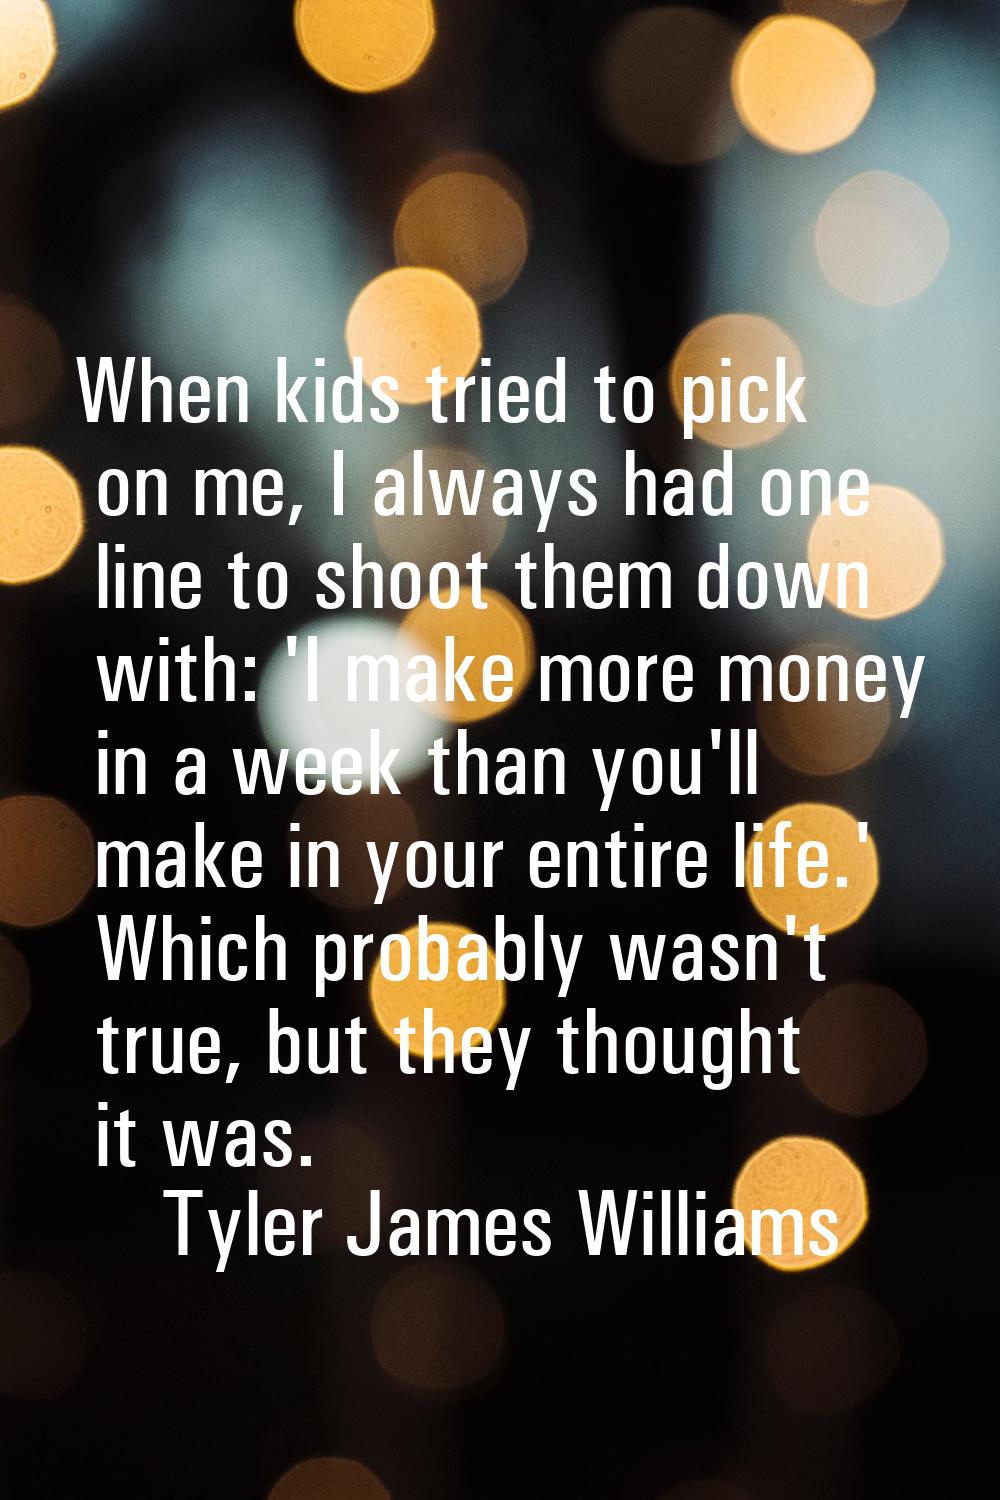 When kids tried to pick on me, I always had one line to shoot them down with: 'I make more money in